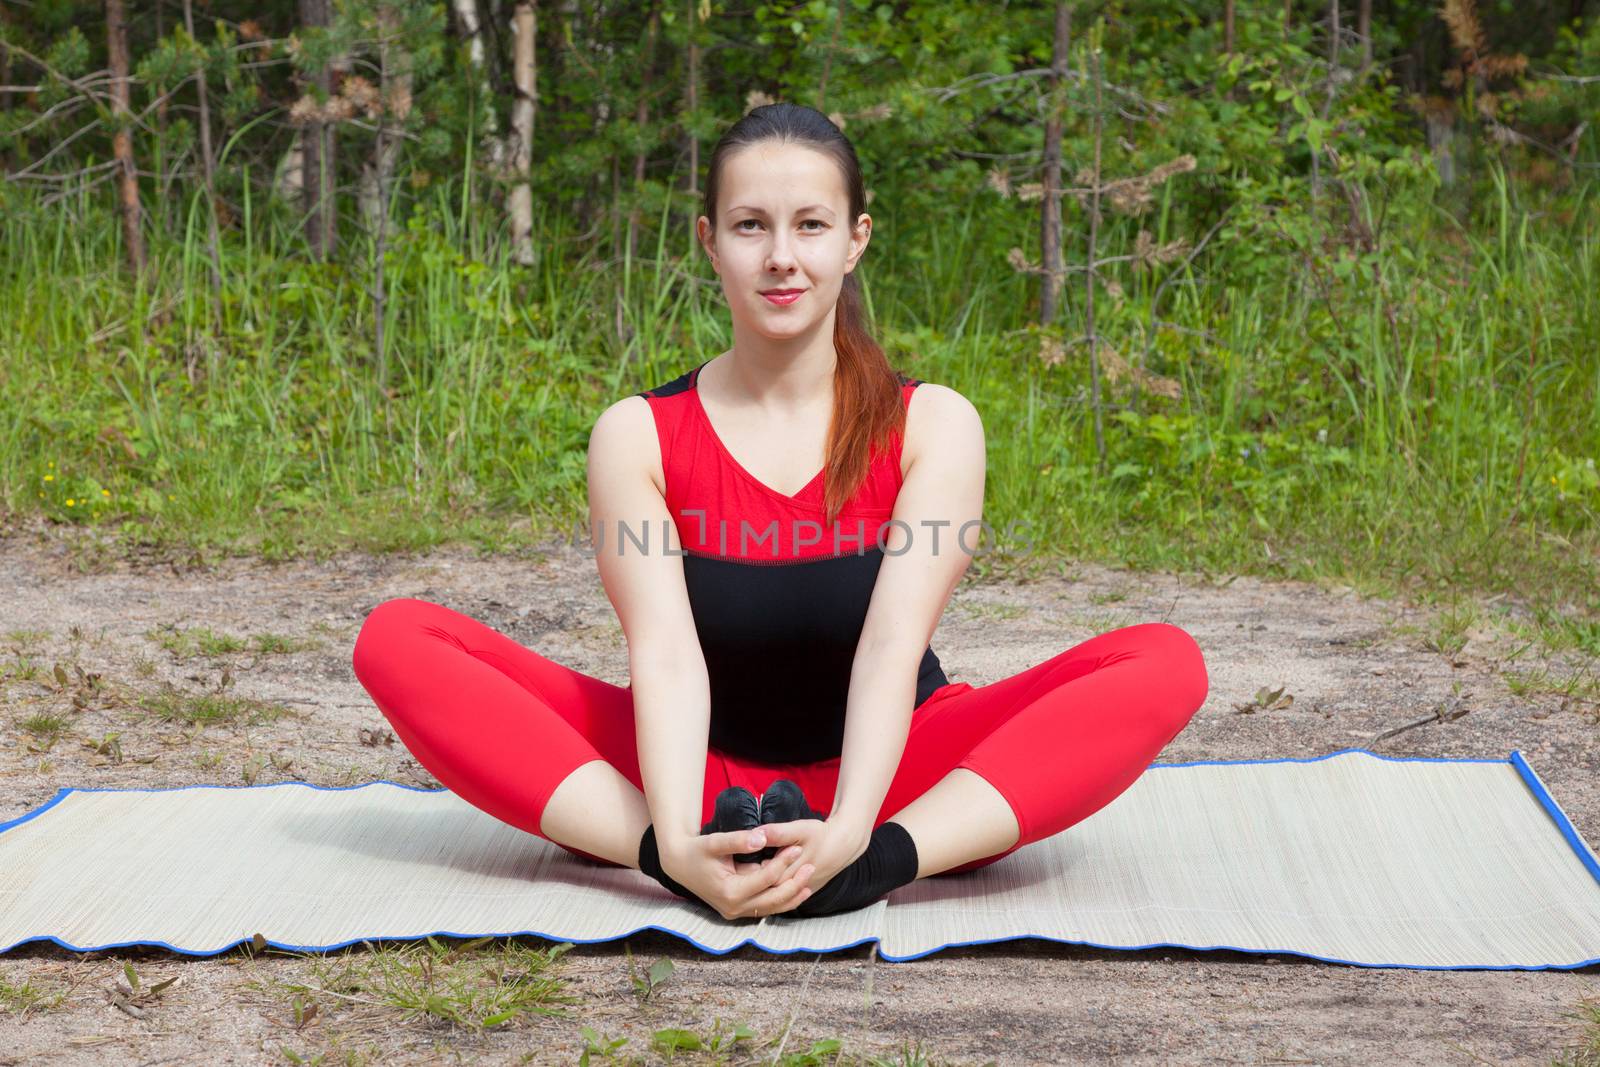 The young girl engaged in yoga class in a forest glade